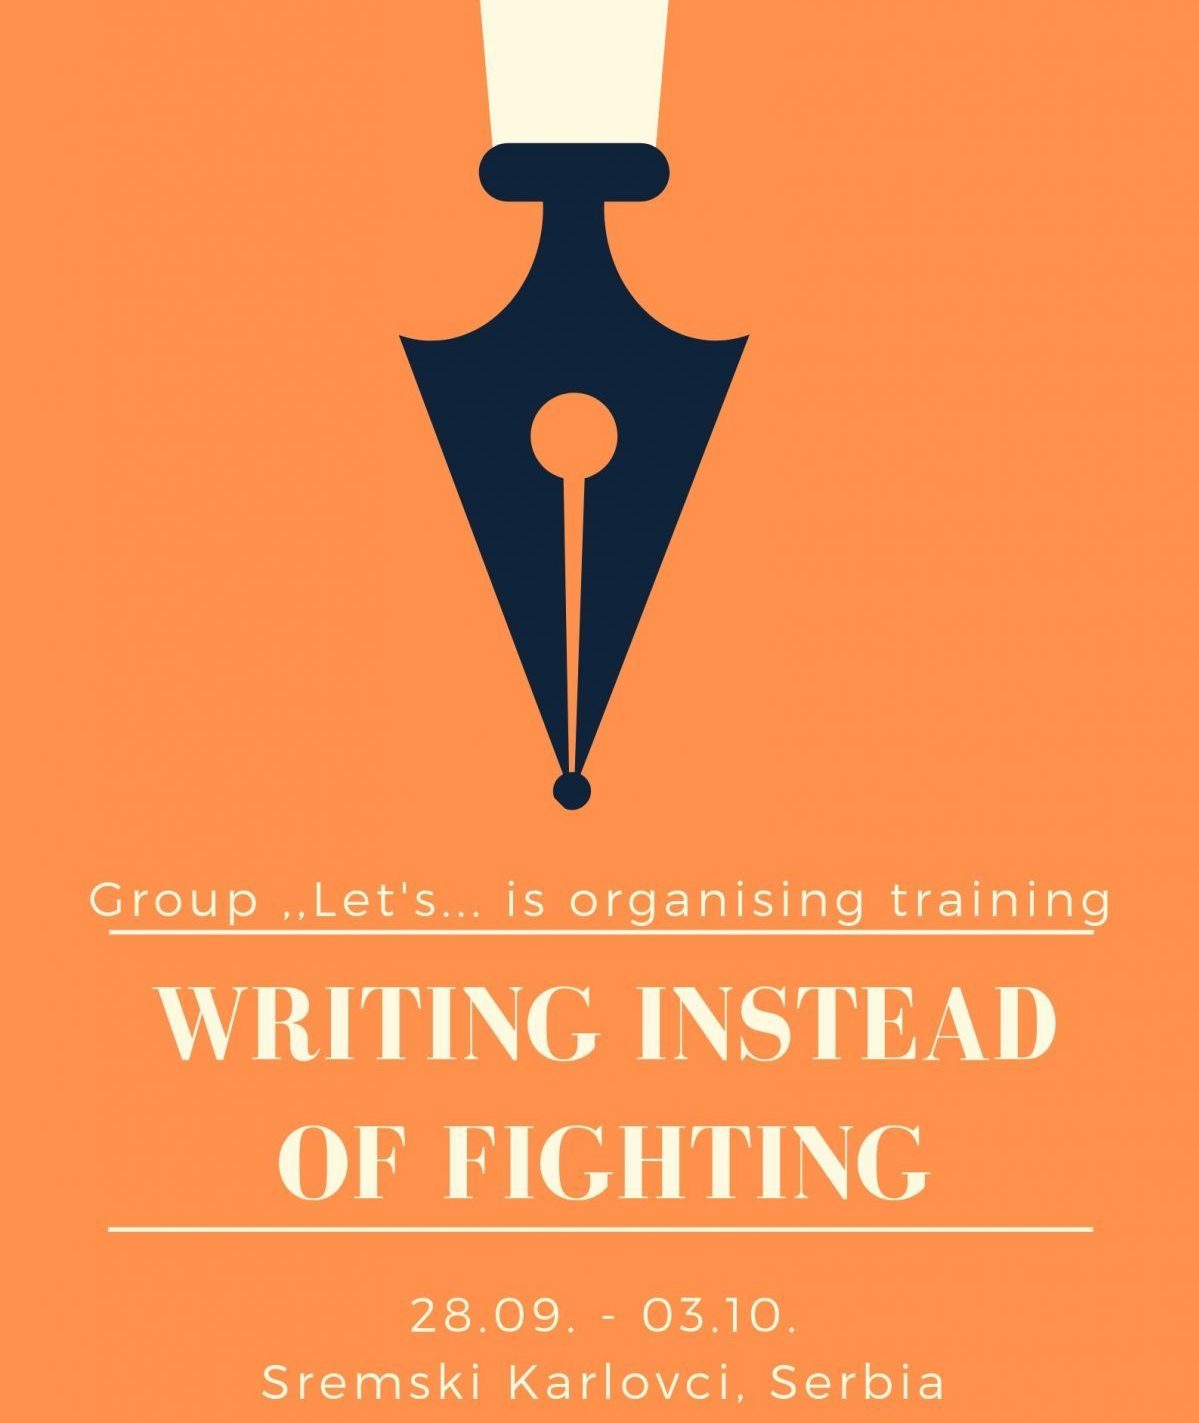 Open Call for Training Course “Writing Instead of Fighting”